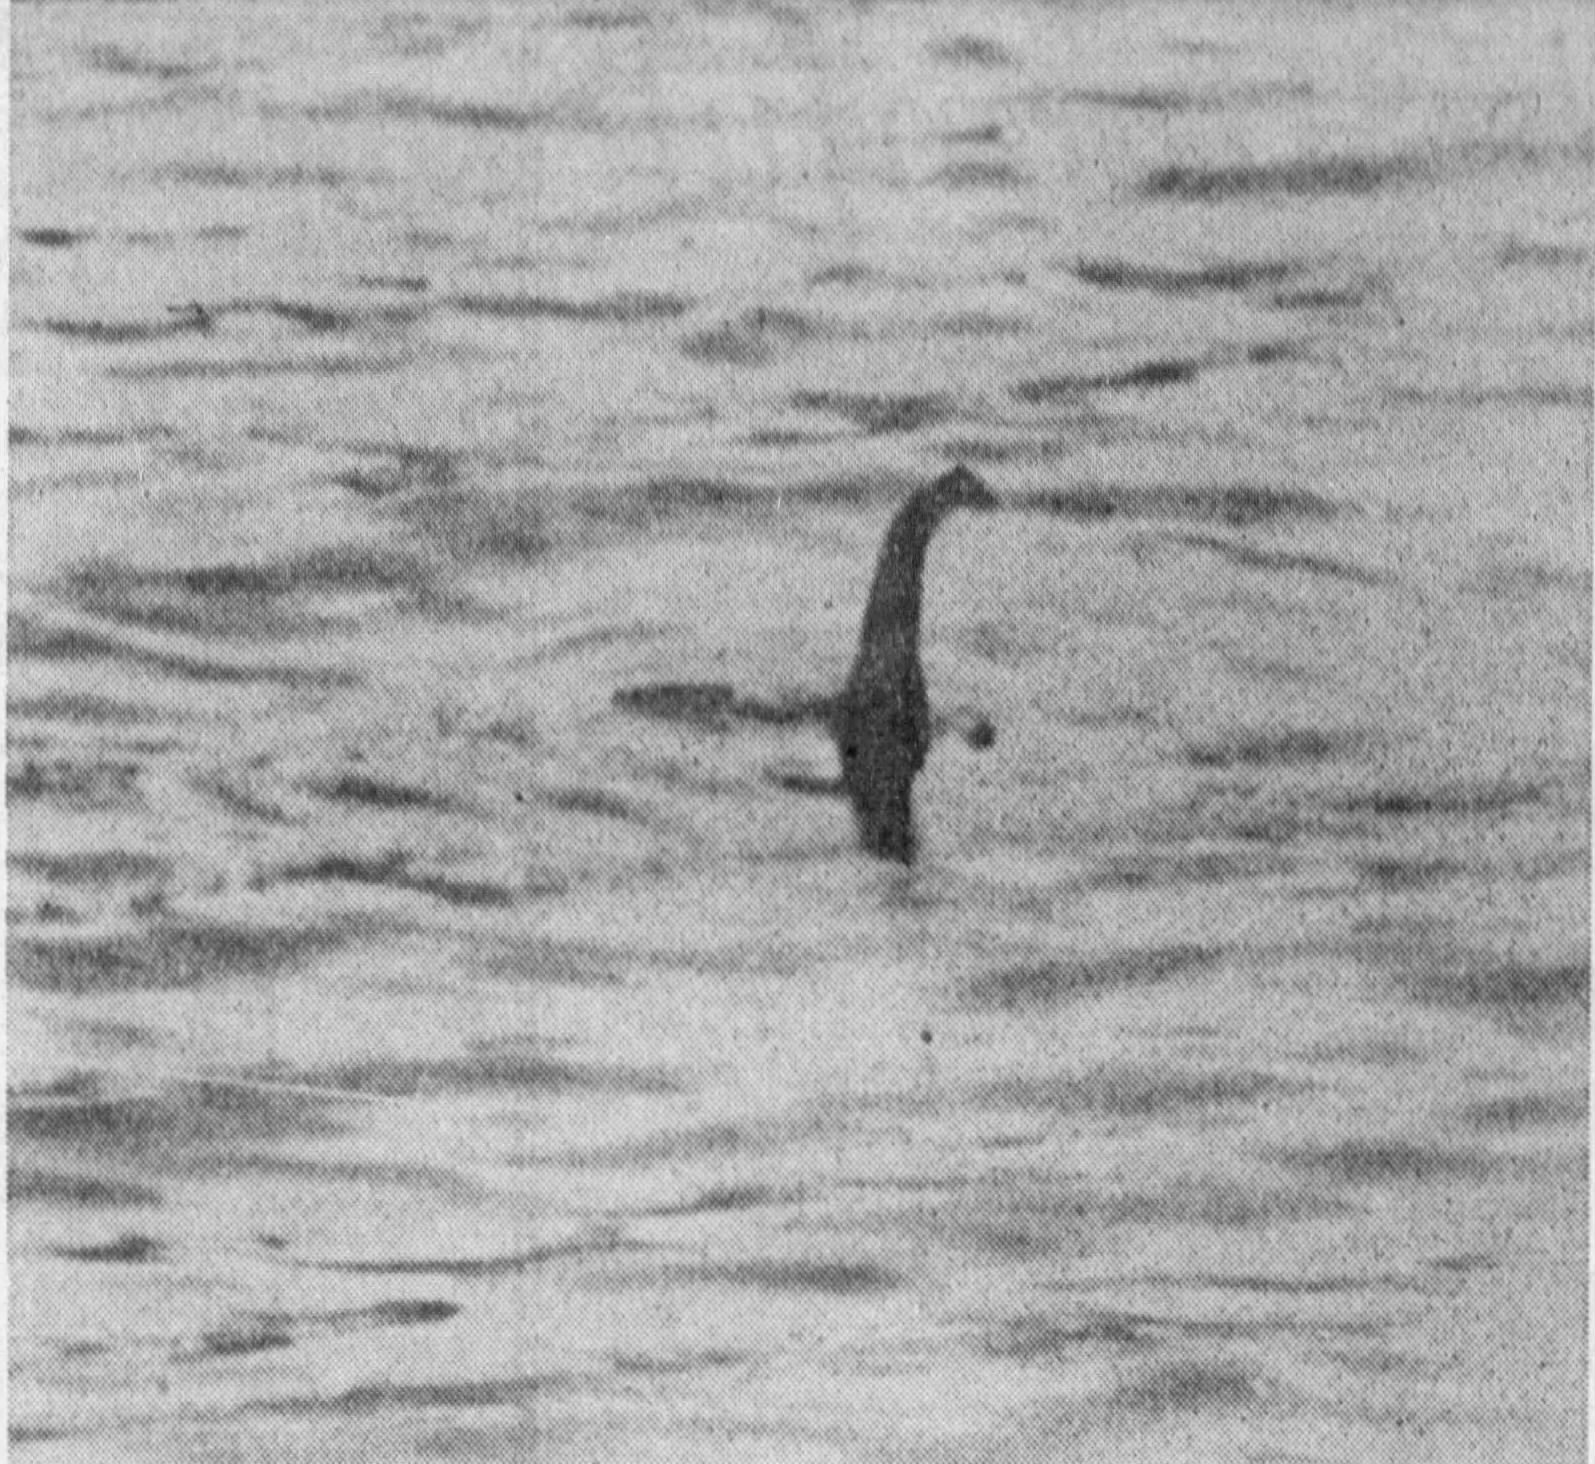 Famous 1934 "Surgeon's Photograph" of the Loch Ness Monster said to be taken by R. Kenneth Wilson